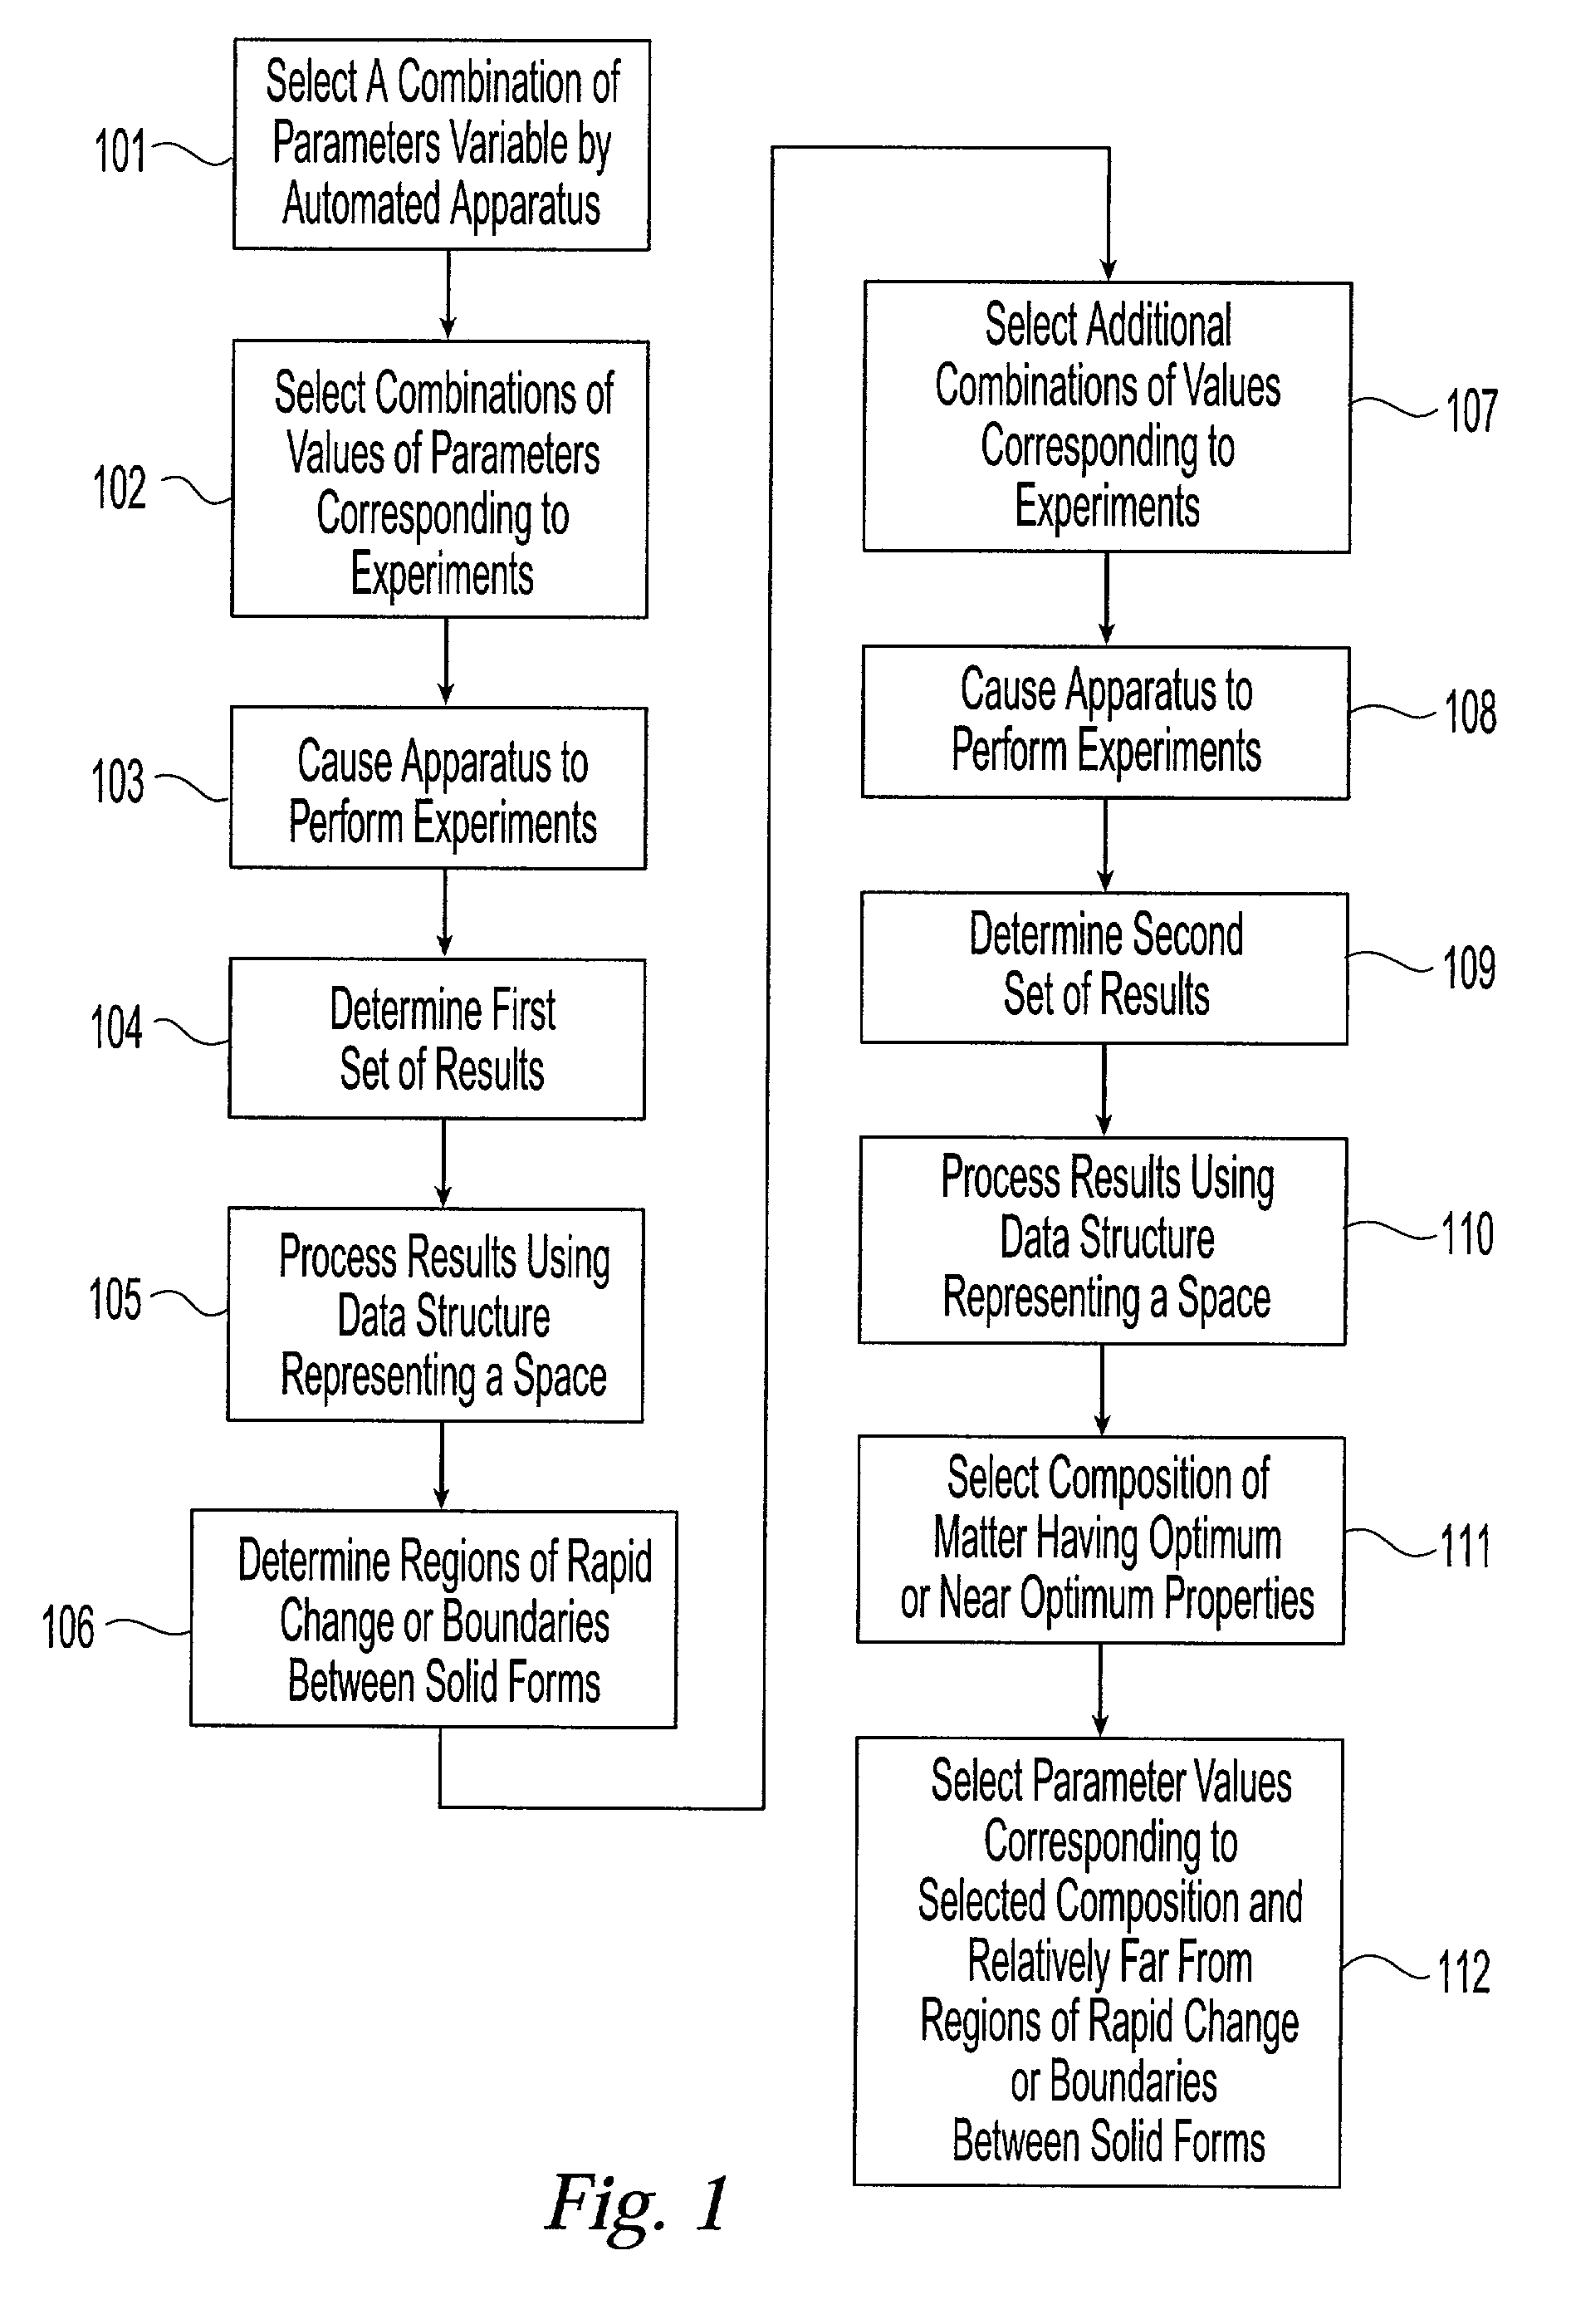 Method and system for planning, performing, and assessing high-throughput screening of multicomponent chemical compositions and solid forms of compounds